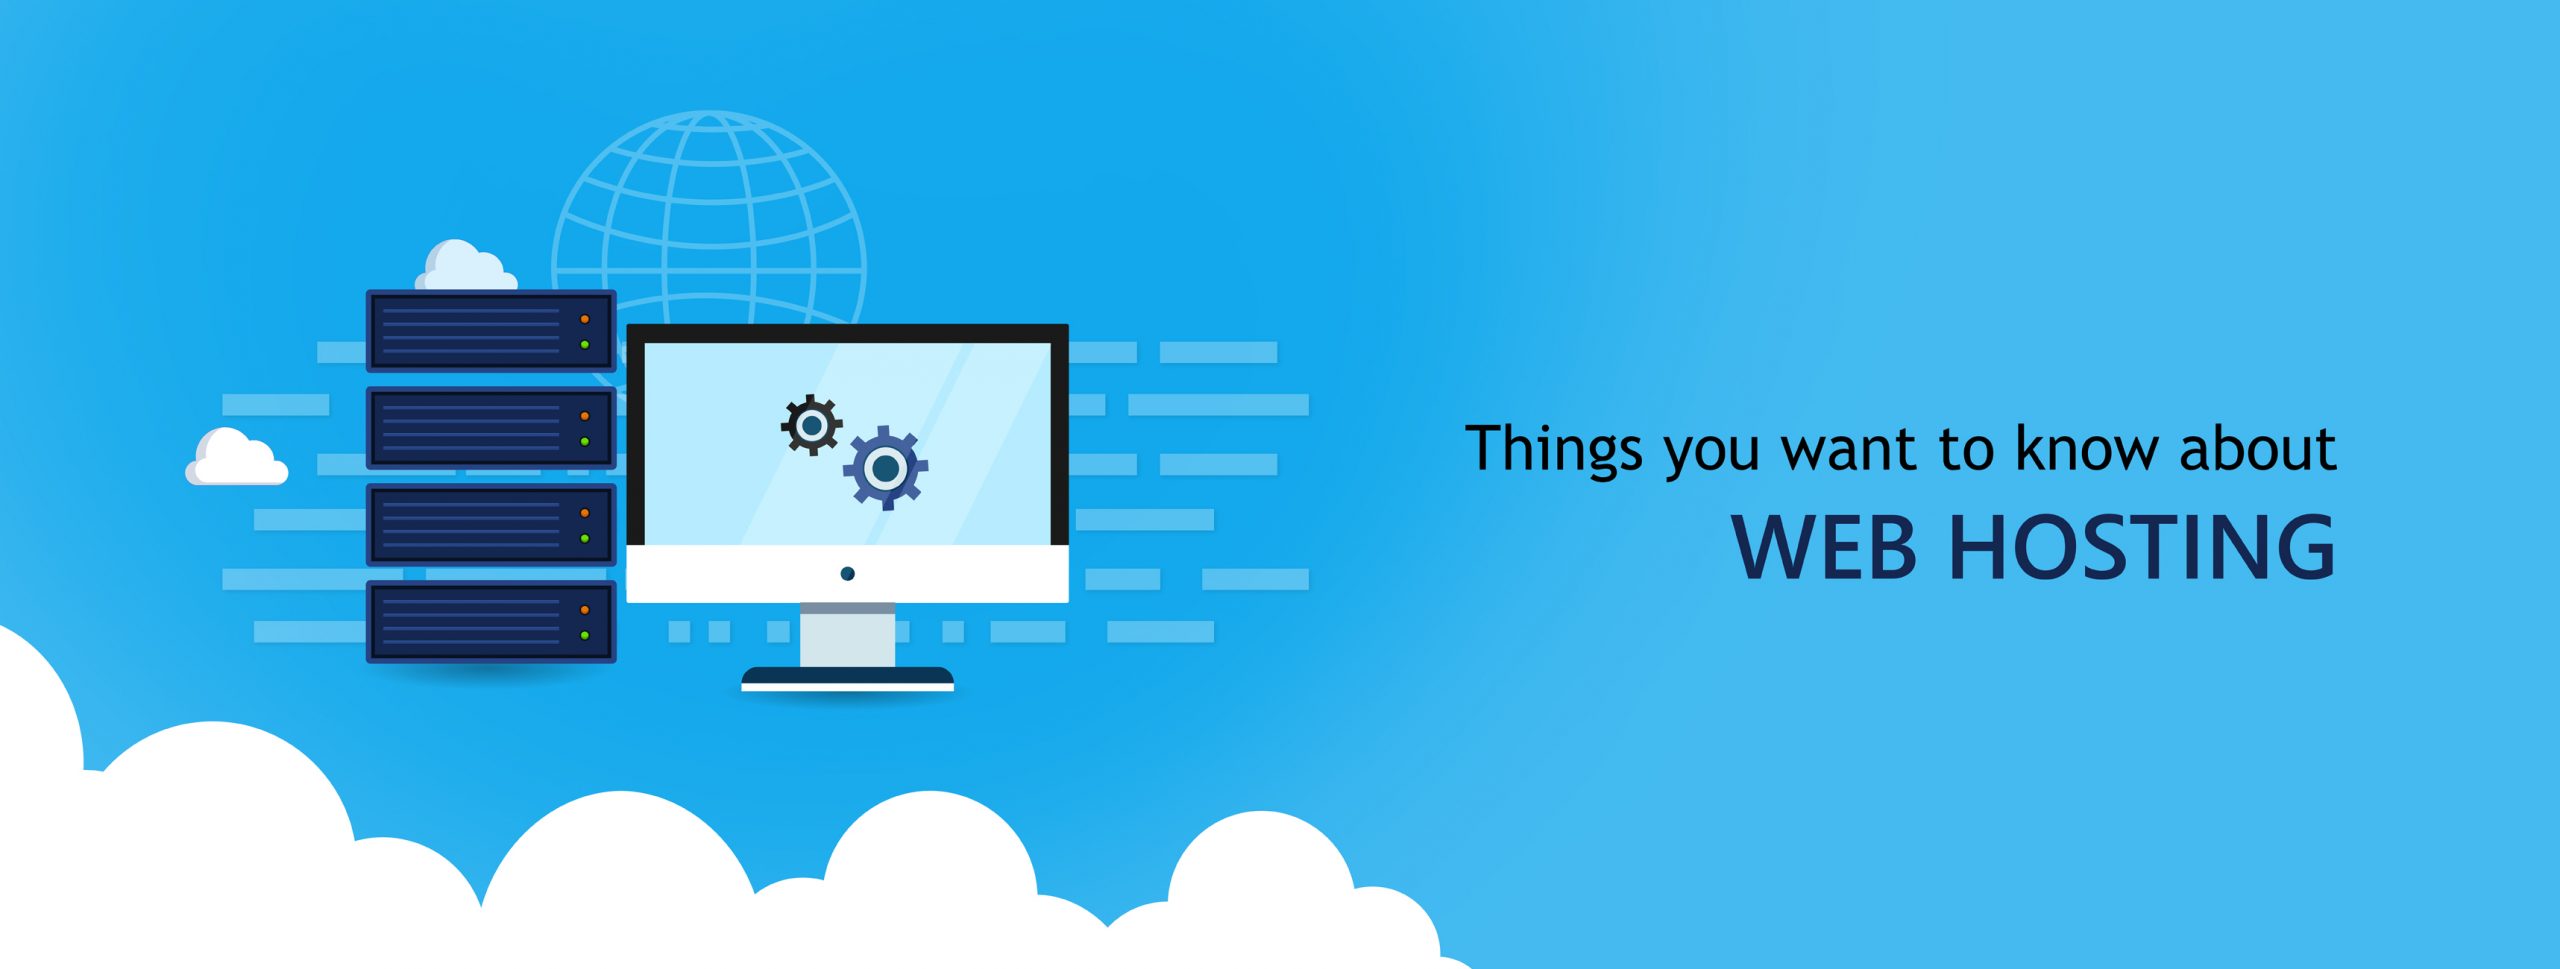 things-you-want-to-know-about-webhosting-devops-gurukul